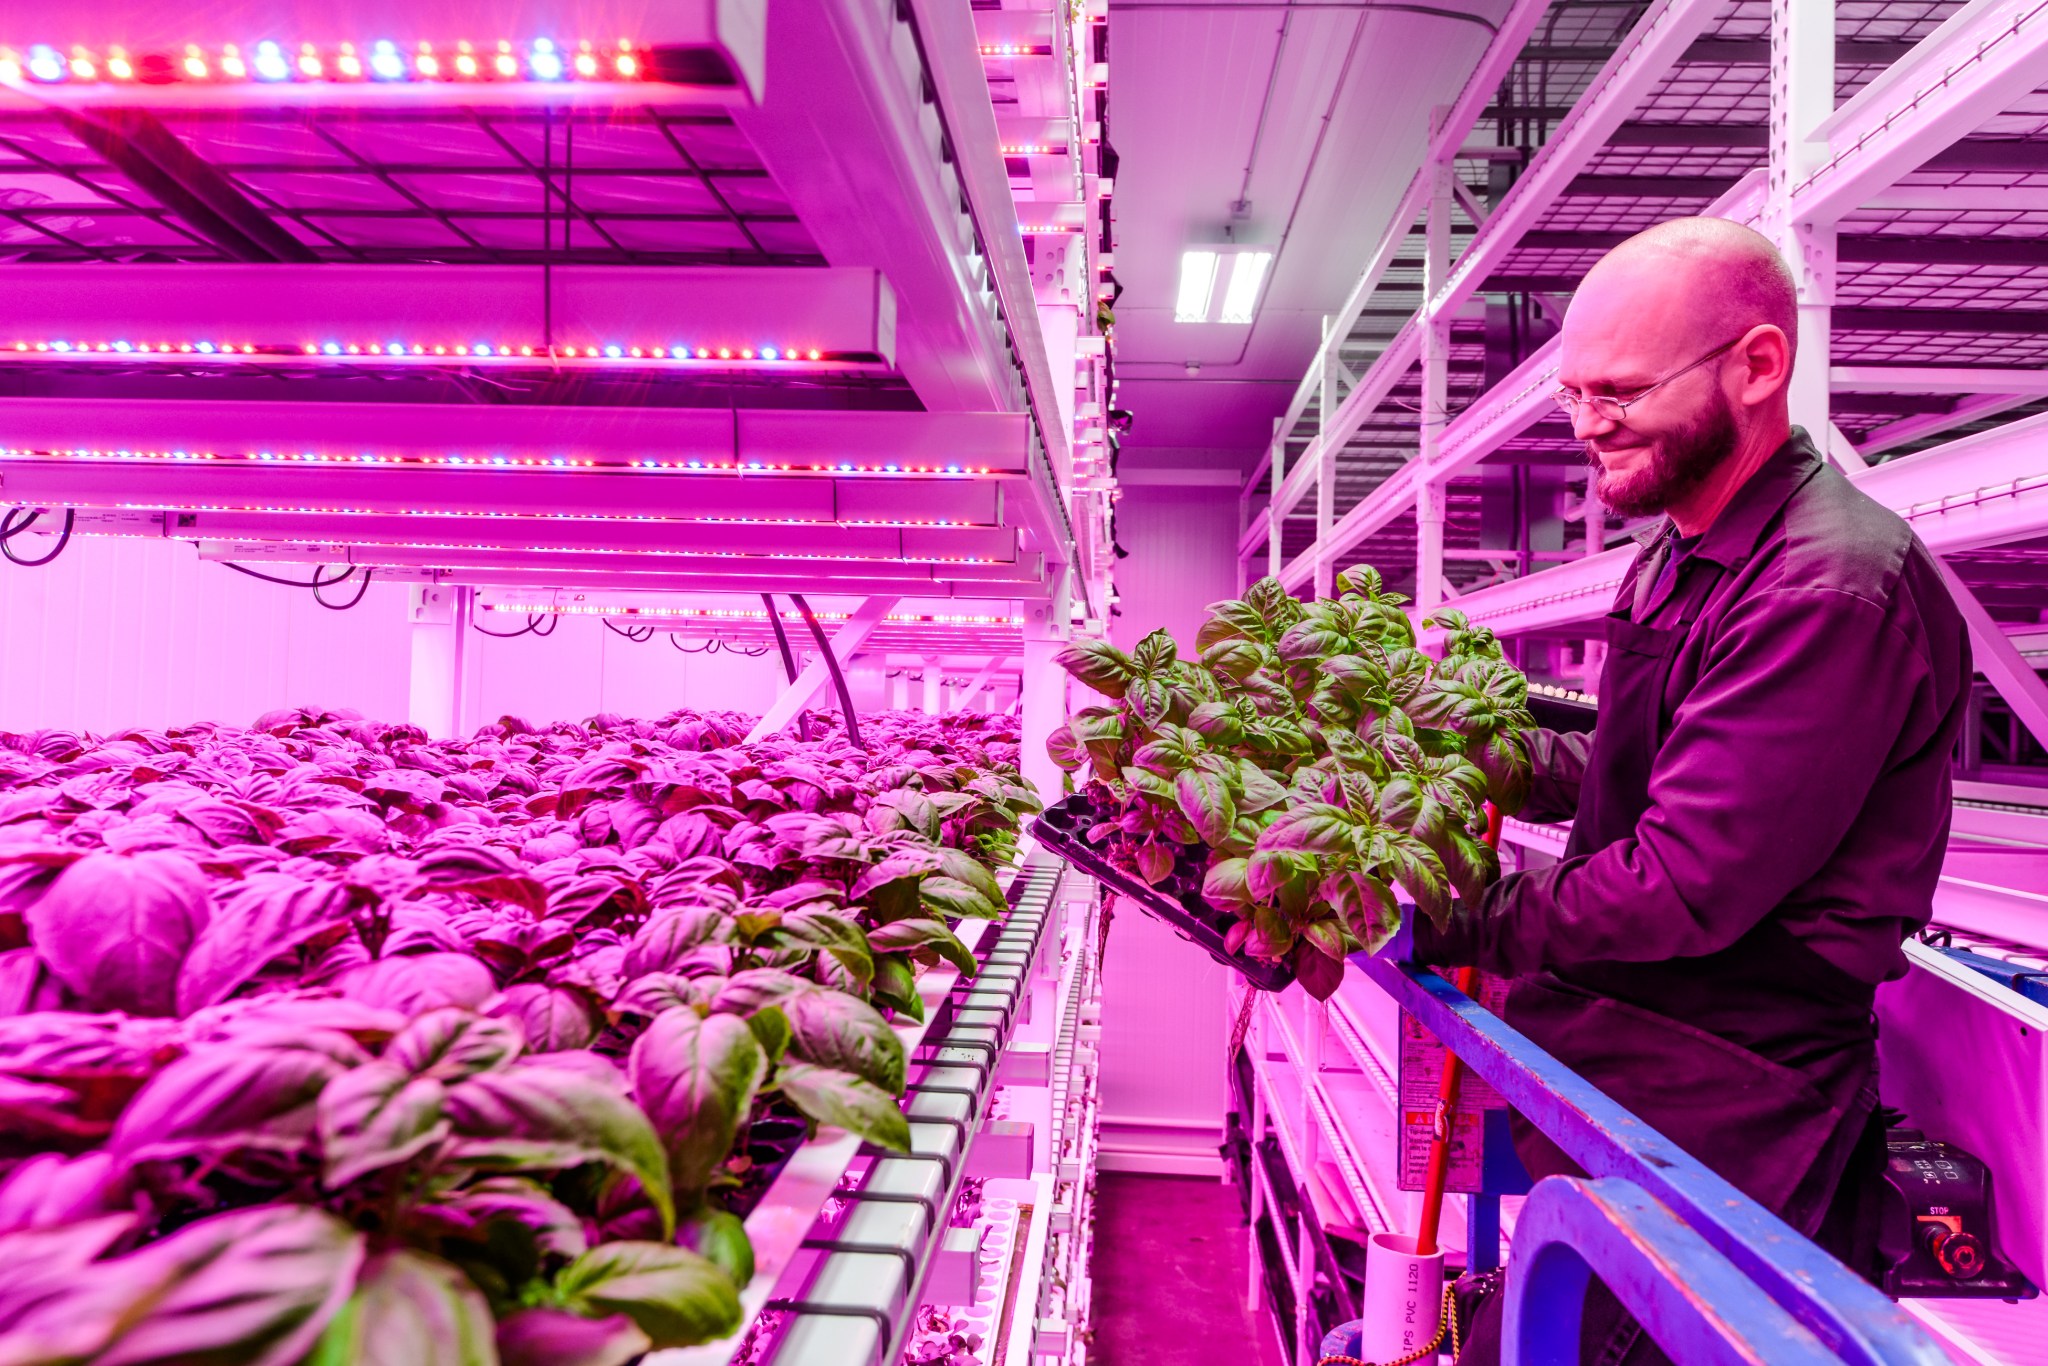 Chief engineer smiling at vegetation growing under red lights.  